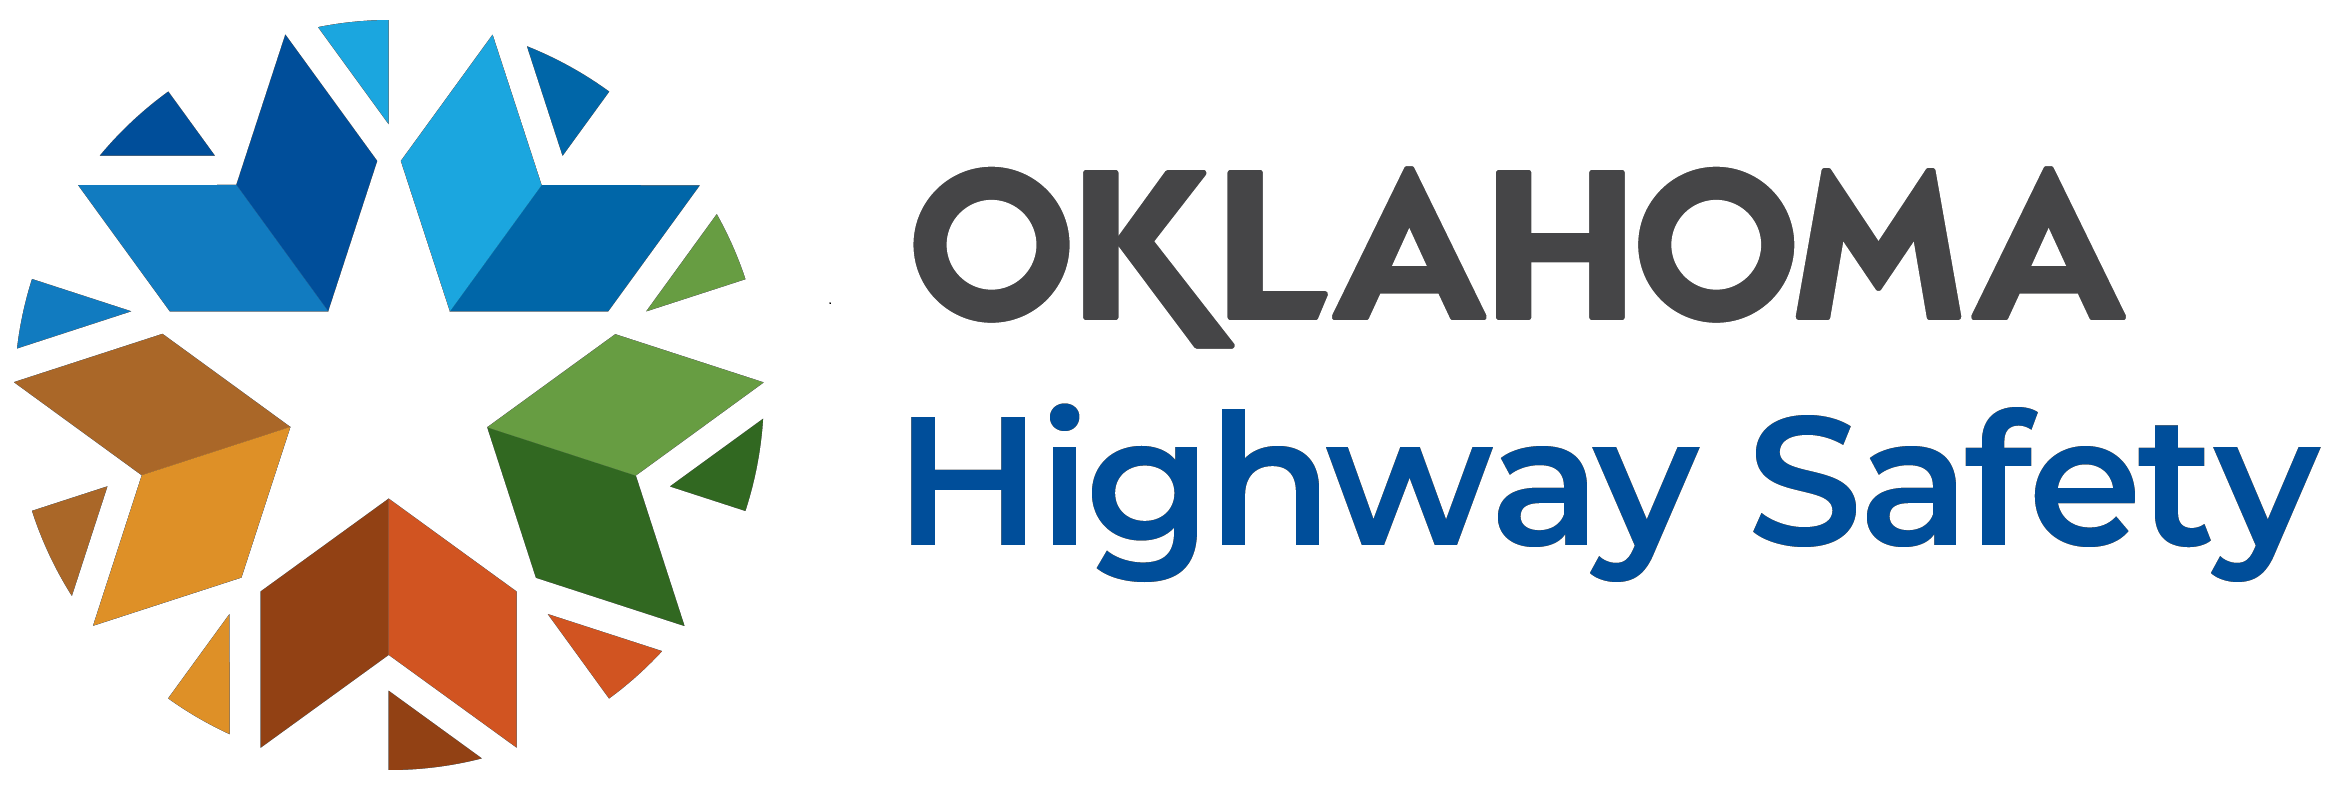 Oklahoma Highway Safety Office Home